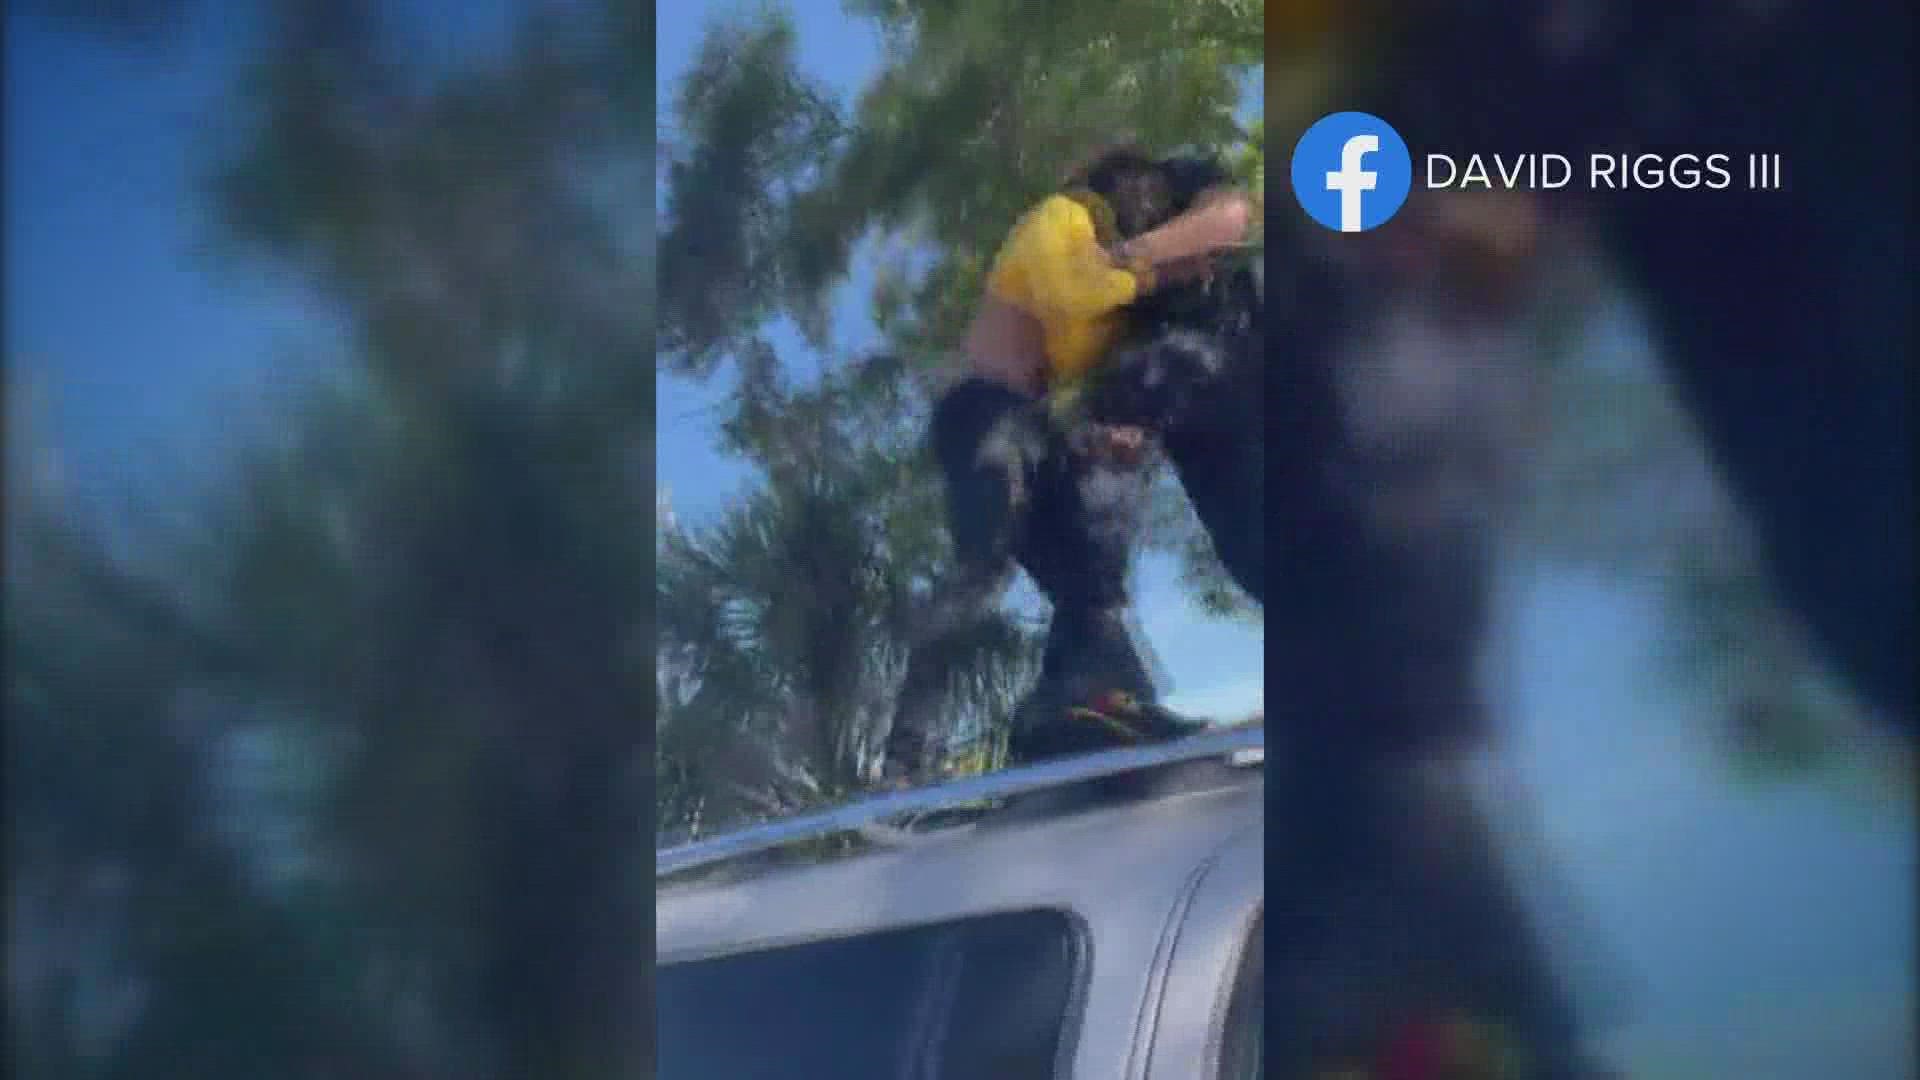 The standoff and struggle were captured in a Facebook livestream that appears to have been started by the person on the roof of the SUV.